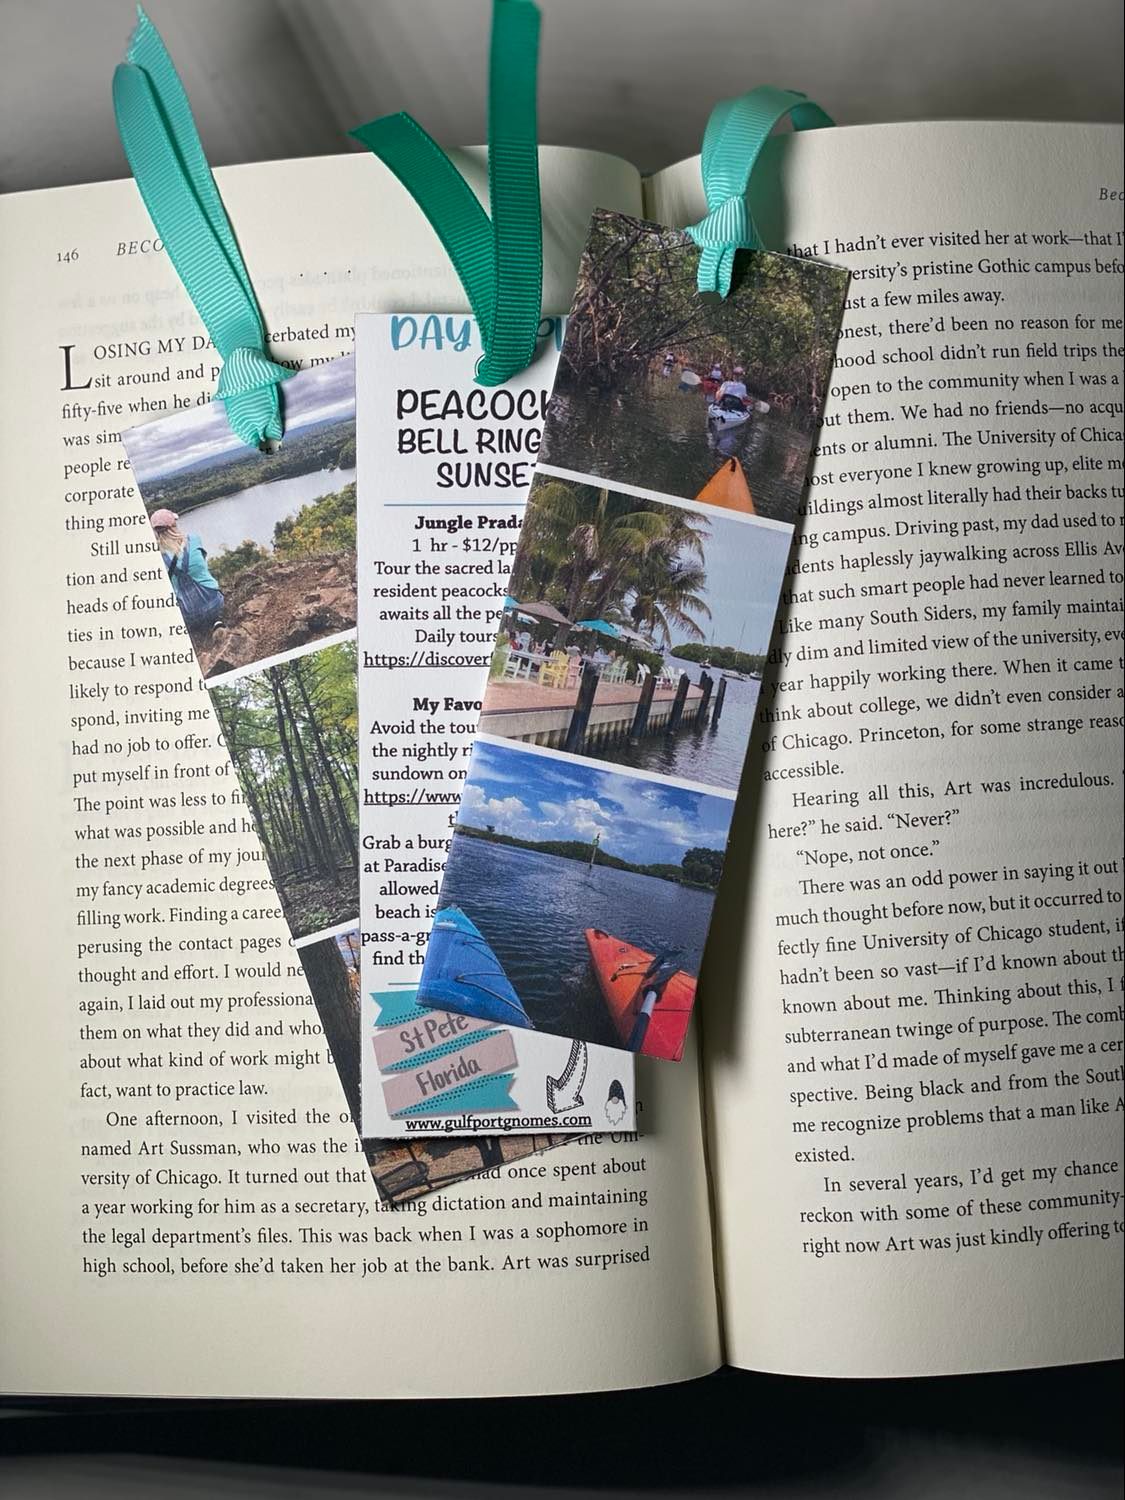 Digital Download-Bookmark and Pocket Cards-Daytrippin Adventure to Bald Mountain in NY ADK